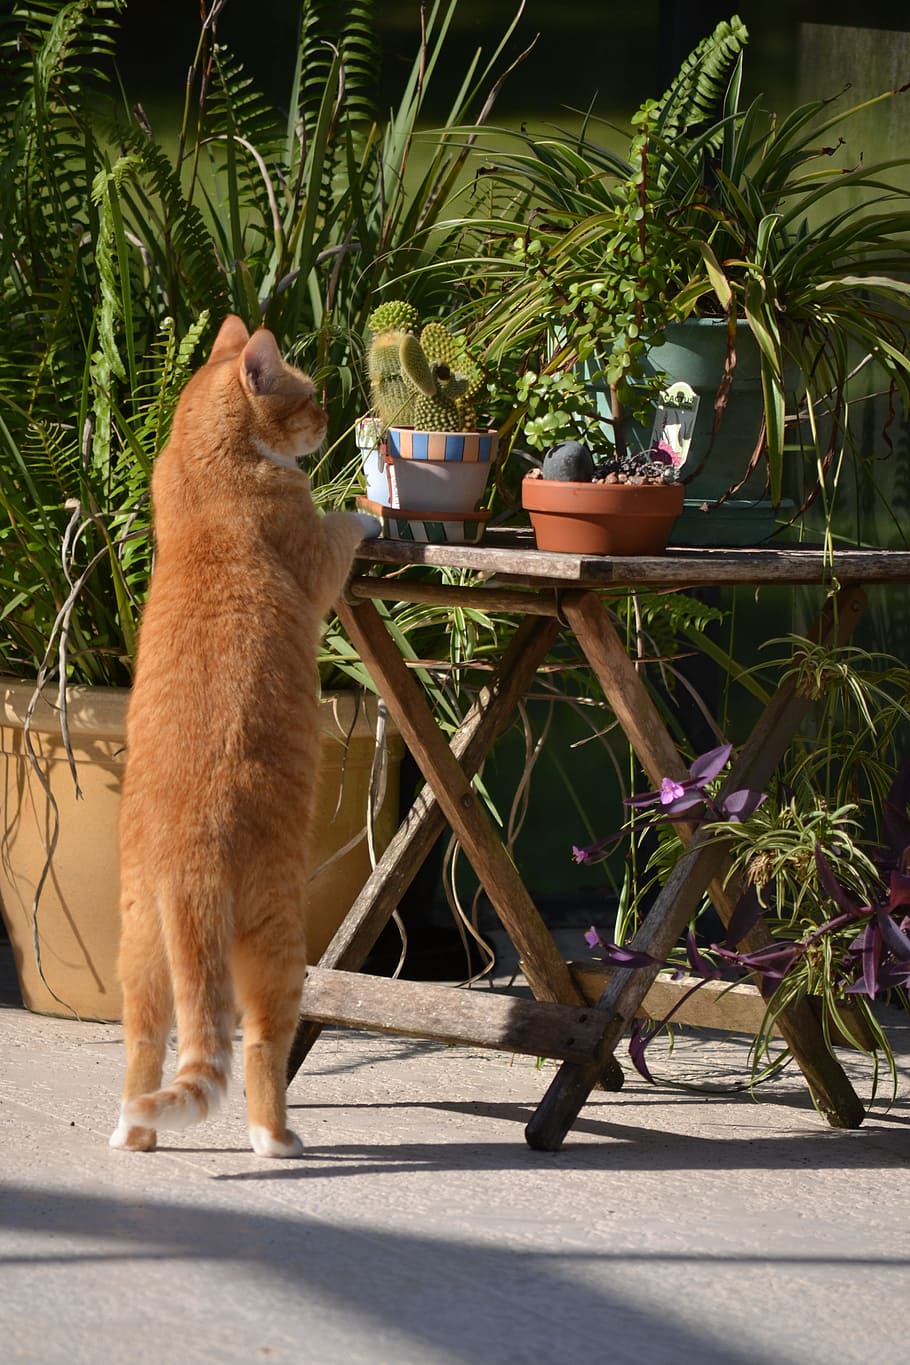 inquisitive cat, cat standing on hind legs, curious, mammal, animal themes, one animal, animal, plant, pets, potted plant